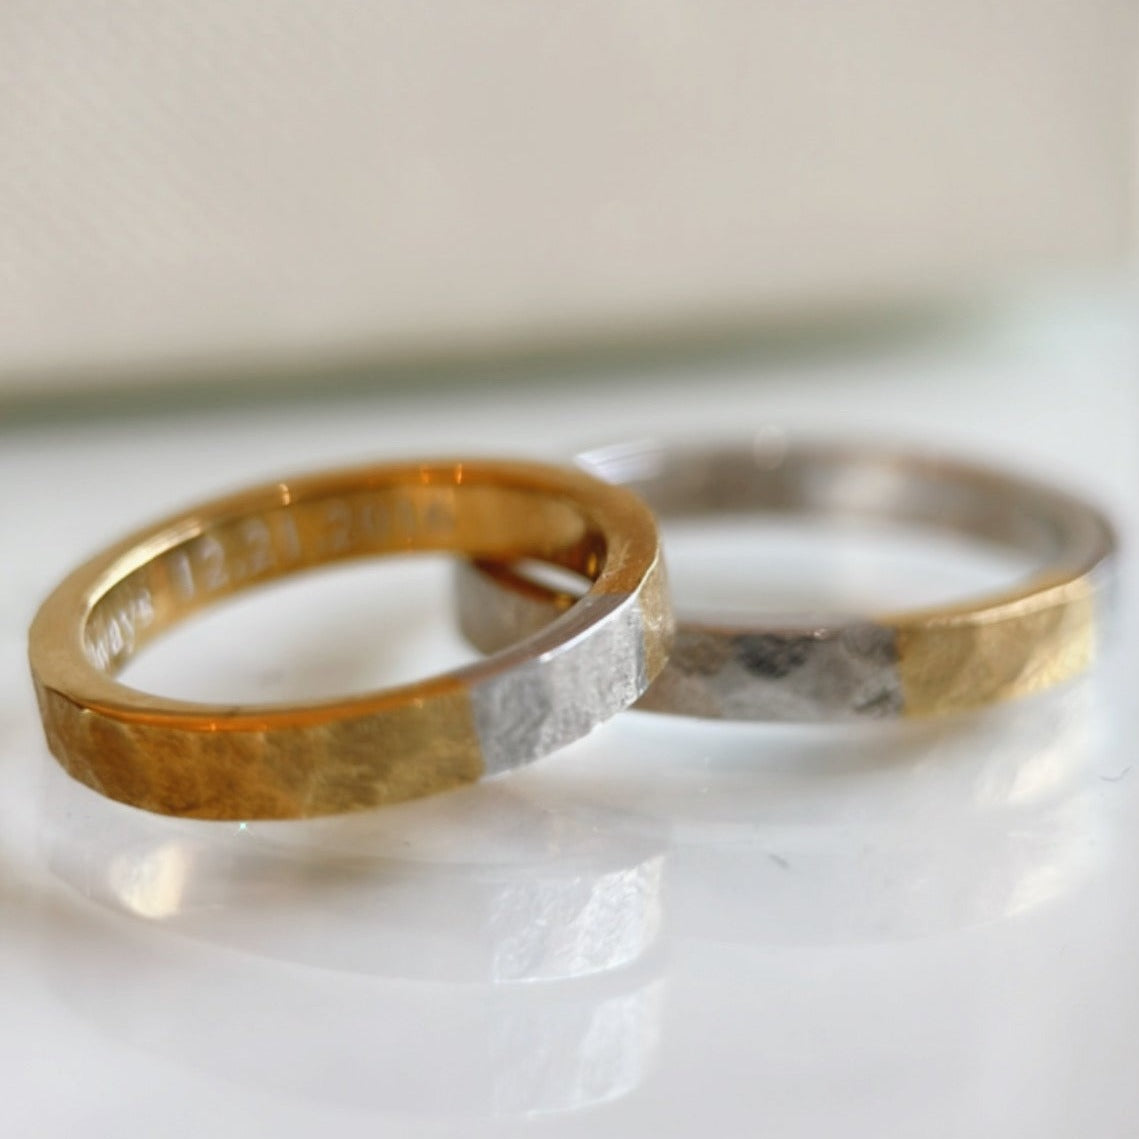 Customizable All Metal Wedding Band with Contrast Panel